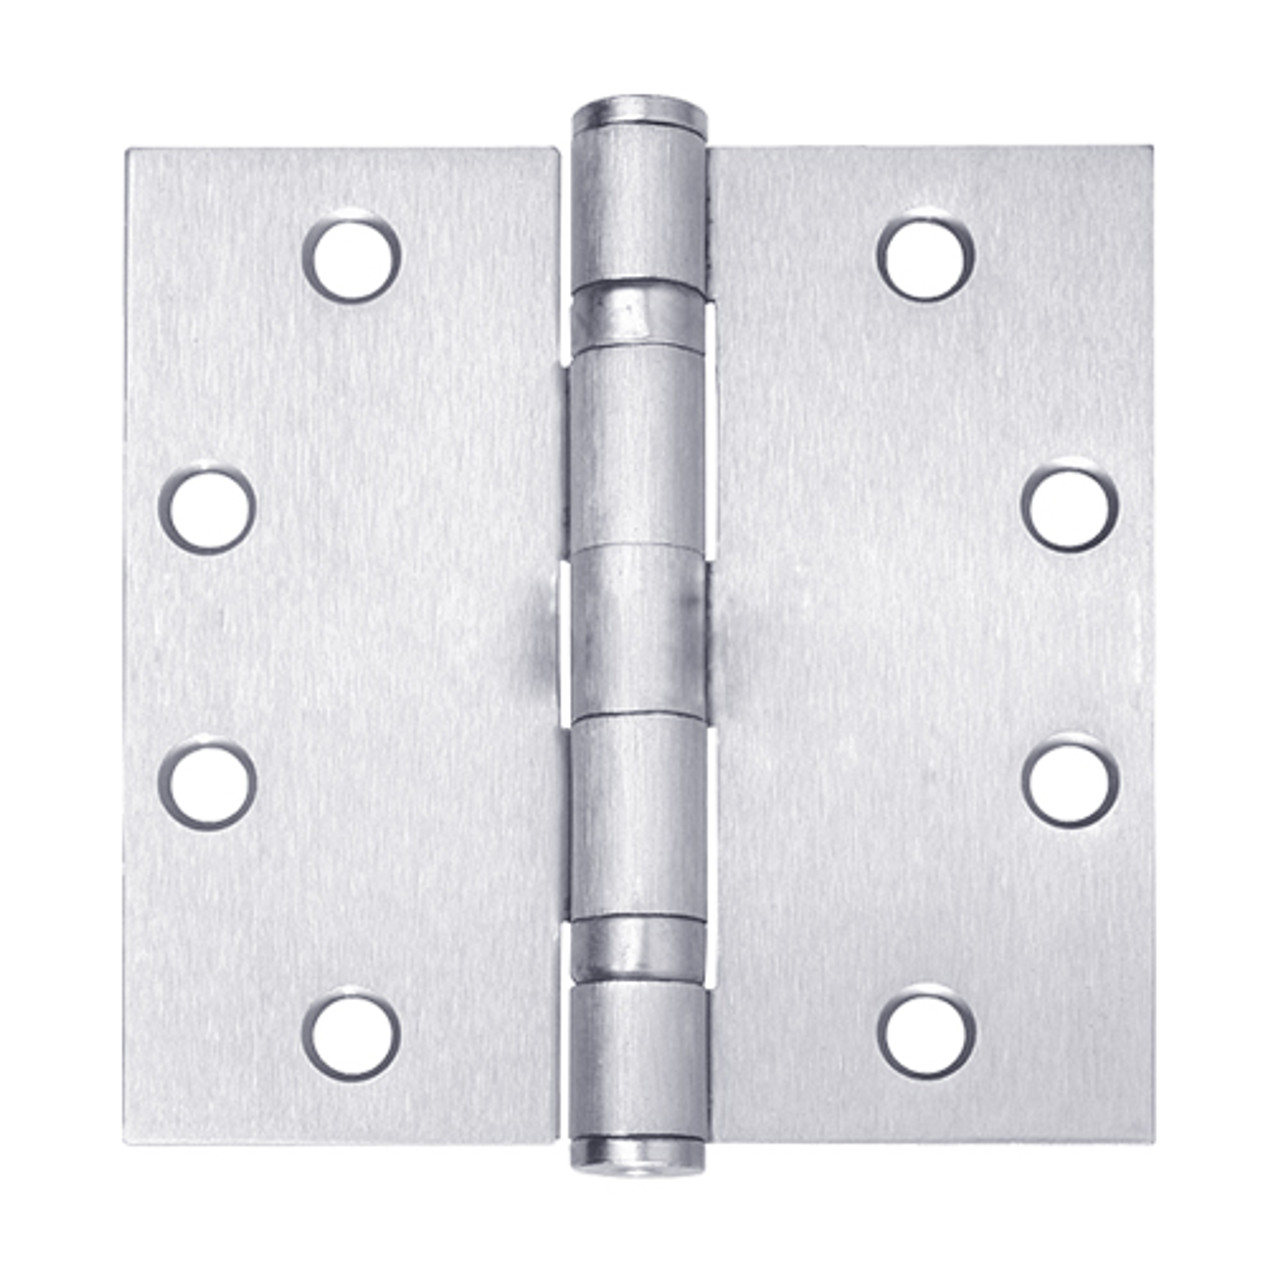 5BB1-5x4-5-625-TW8 IVES 5 Knuckle Ball Bearing Full Mortise Hinge with Electric Thru-Wire in Bright Chrome